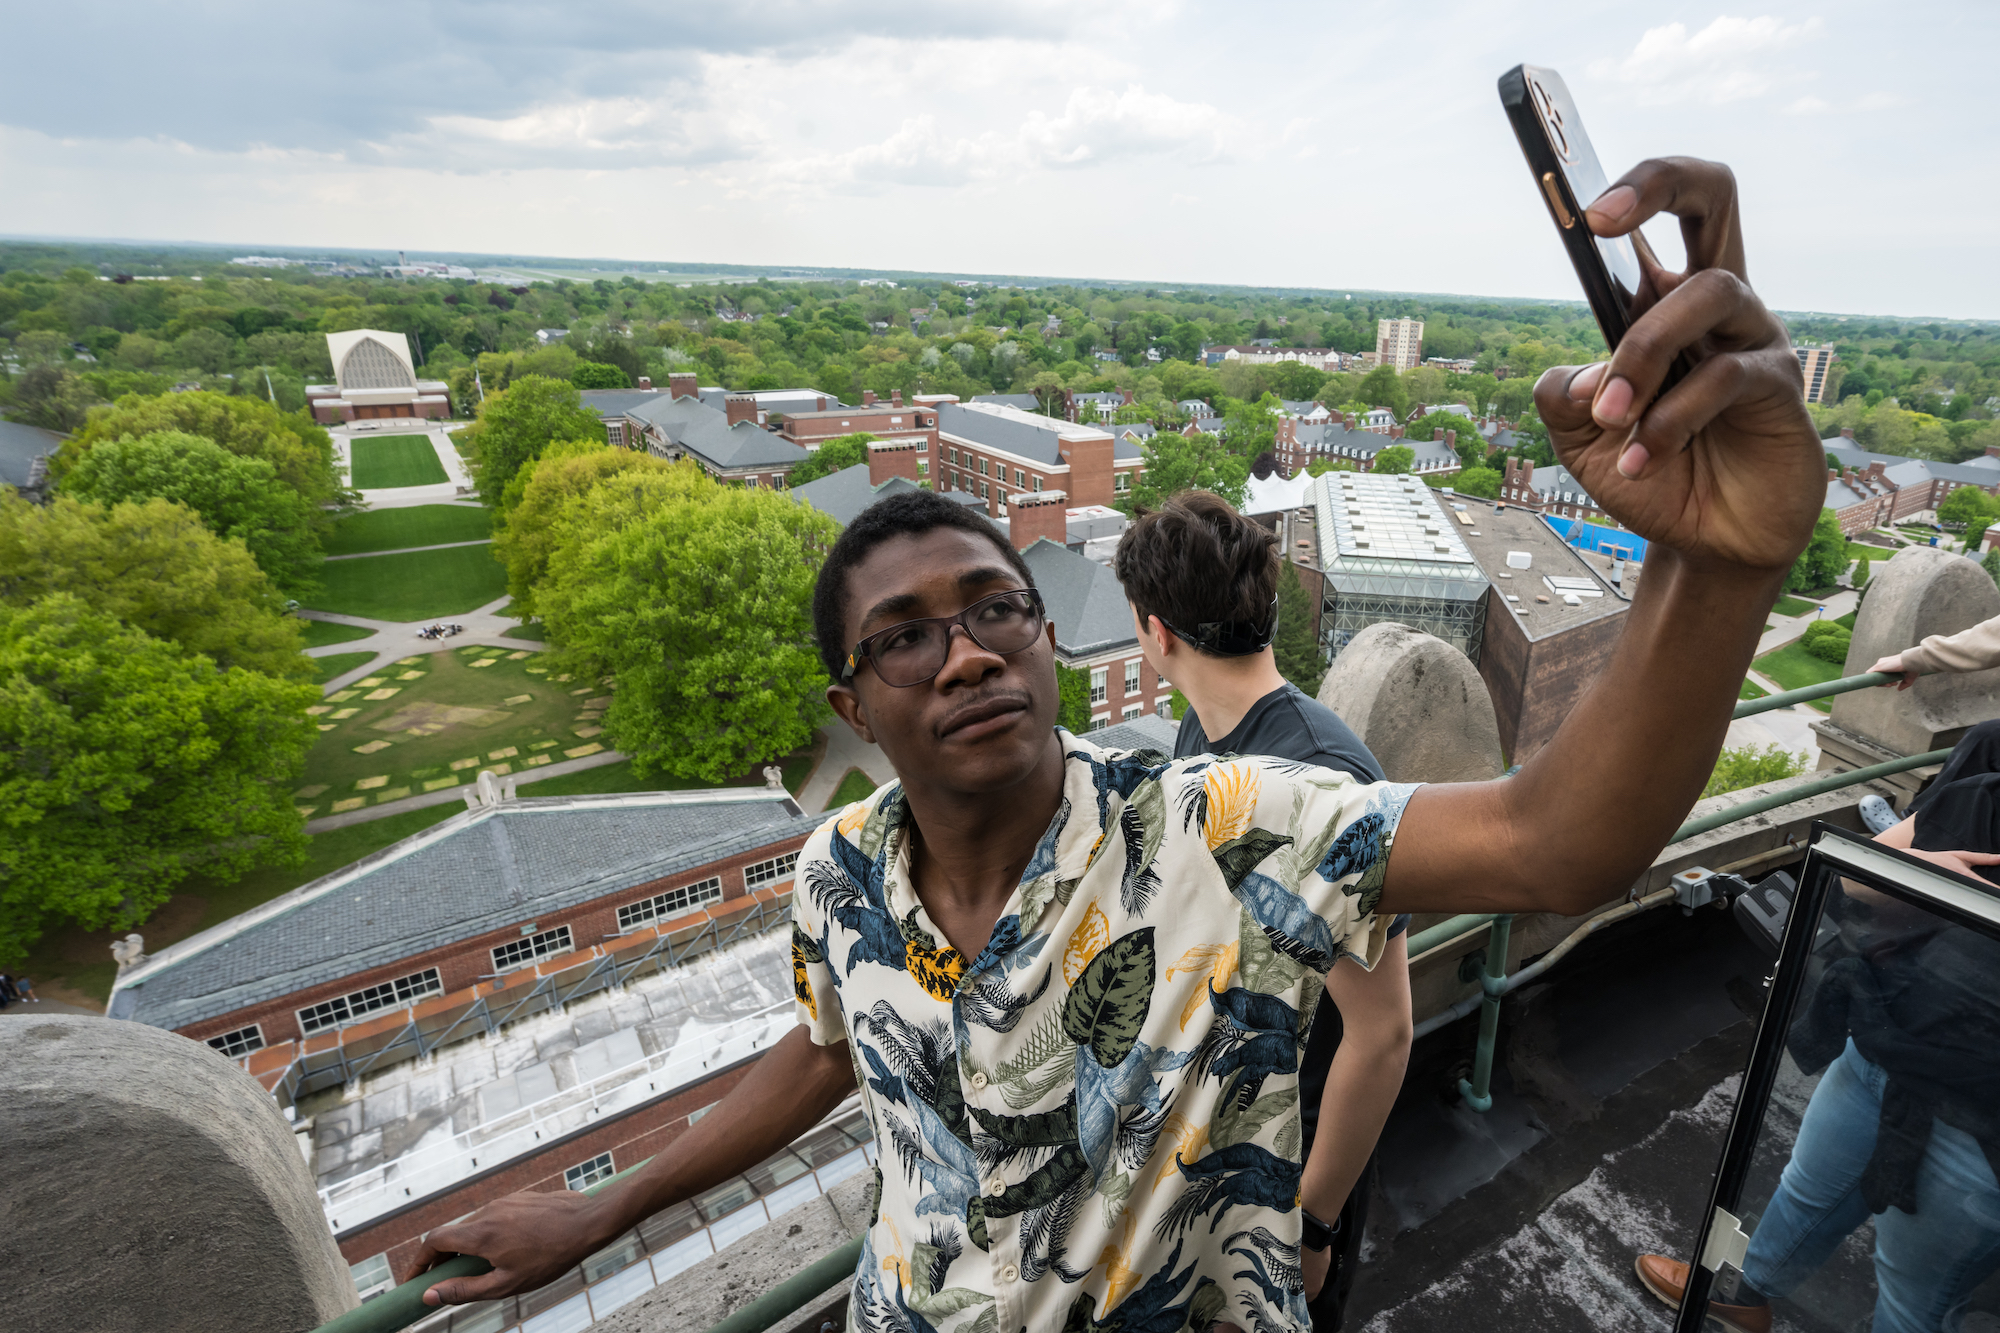 A student atop the library tower takes a selfie with the University of Rochester campus below